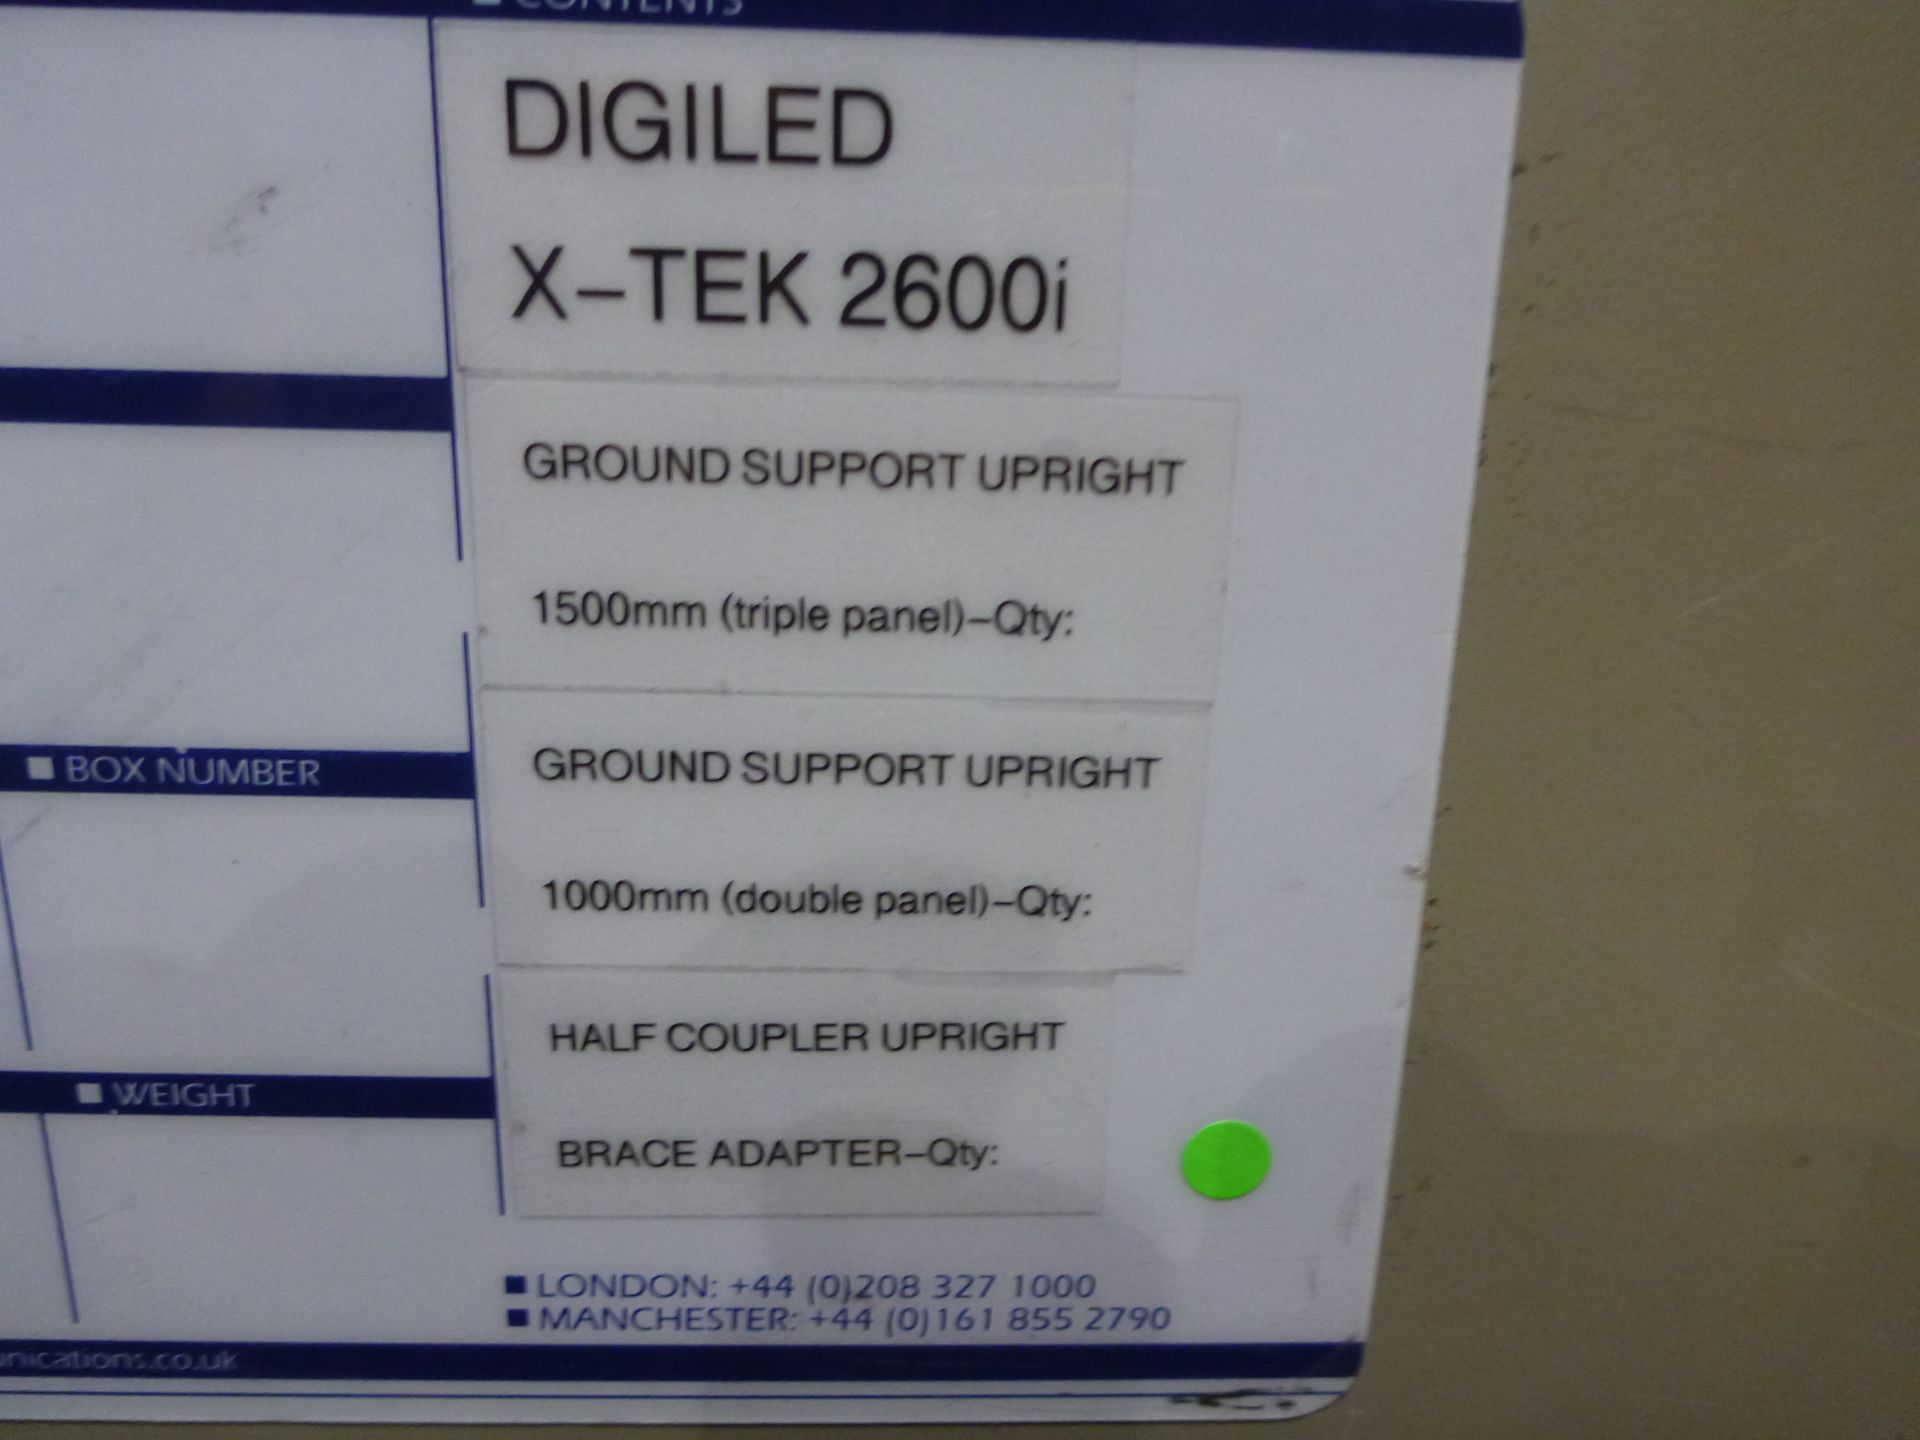 DigiLED X-Tek 2600i Ground Support Uprights 1500 mm triple panel, Qty 9, 1000 mm double panels Qty 1 - Image 4 of 5